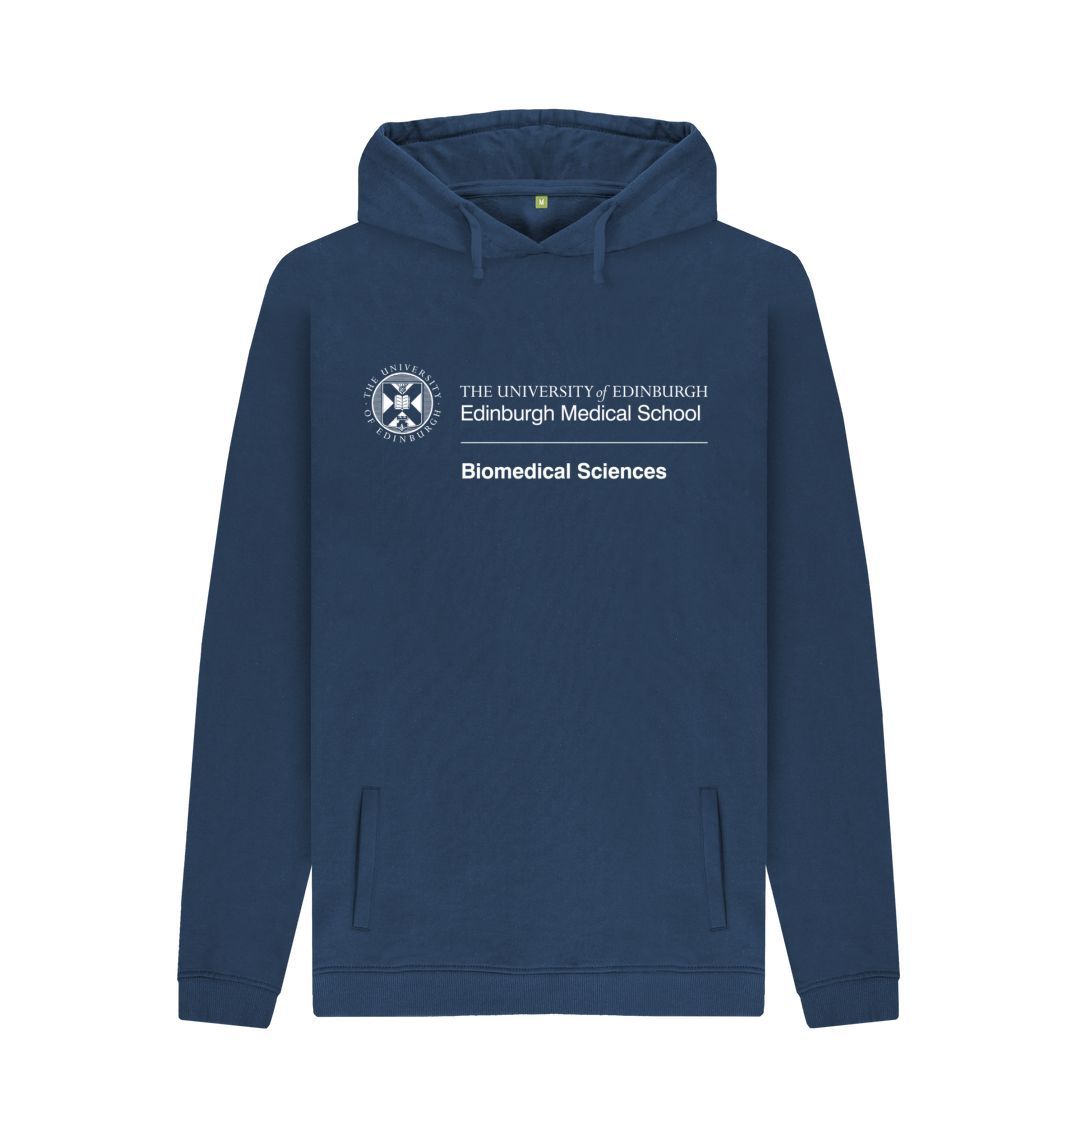 Navy Hoodie with white University crest and text that reads ' University of Edinburgh : Edinburgh Medical School - Biomedical Sciences '